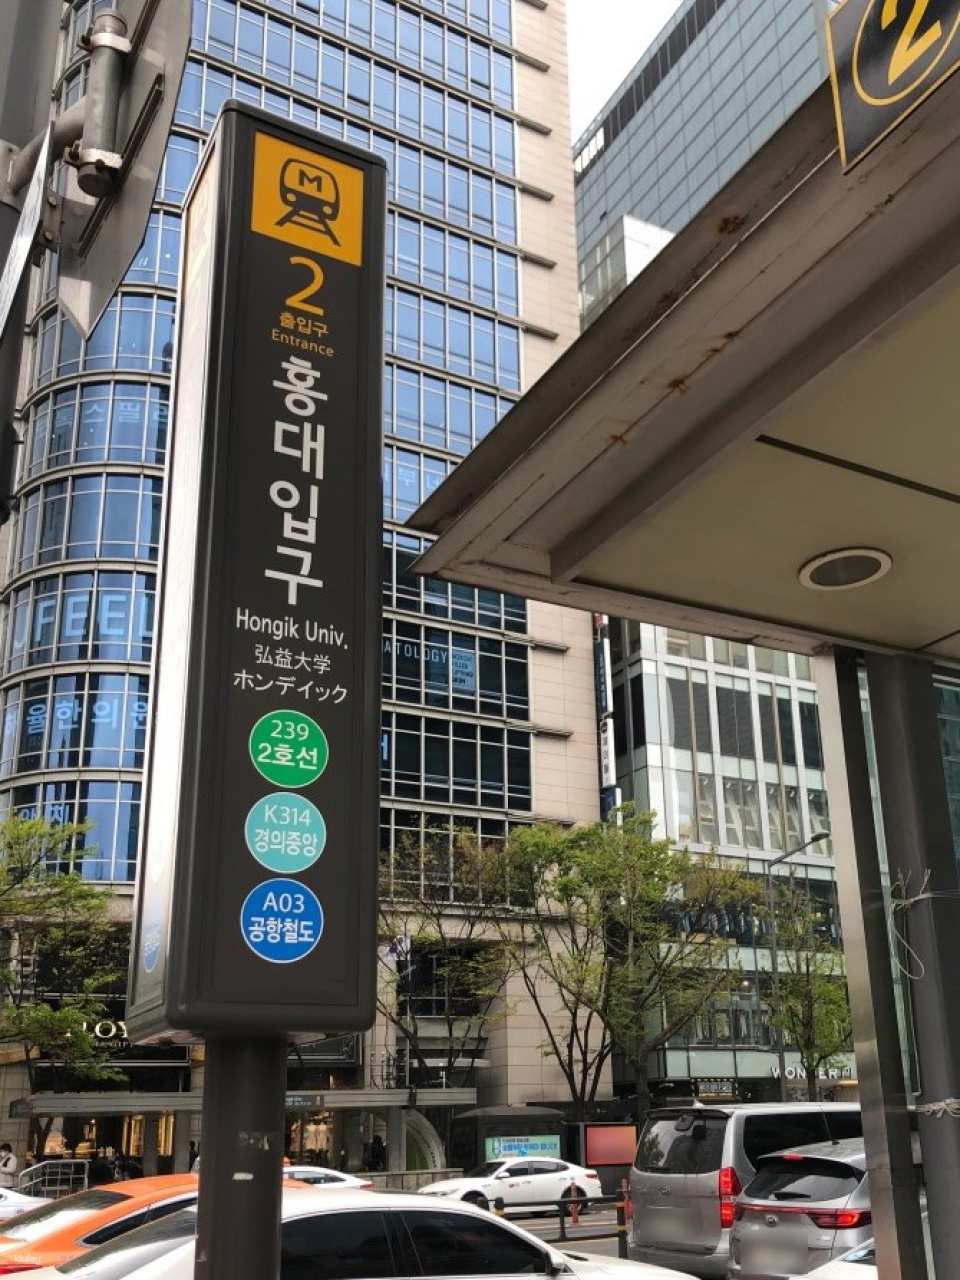 Meet and depart from Hongik University Station Exit 2